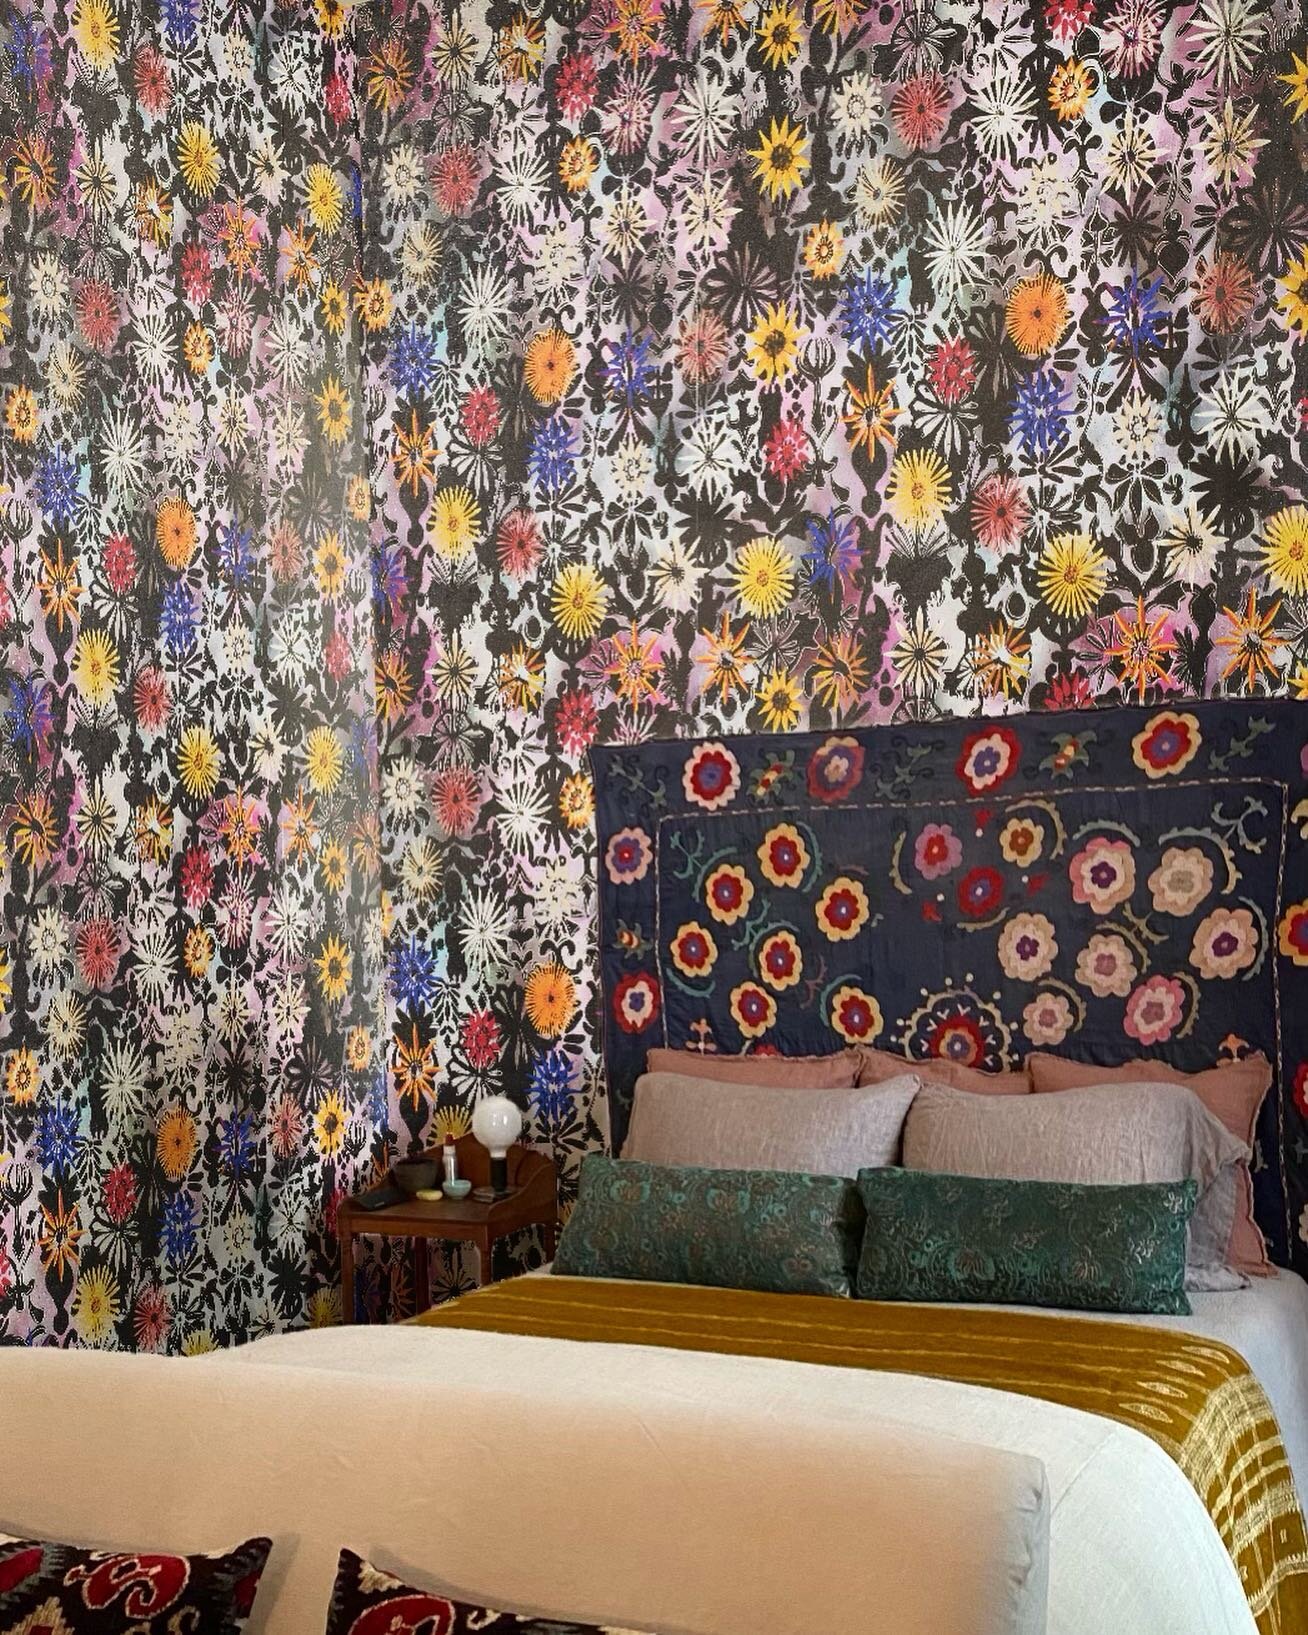 Is more, more? We asked @bedfully the question. And well, we believe this bedroom say yes! #alwaysmoreismore 

#interiordesign #interiordesigner #homedecor #bedroomdecor #roominspiration #moreismoredecor #maximalism #maximalistinteriors